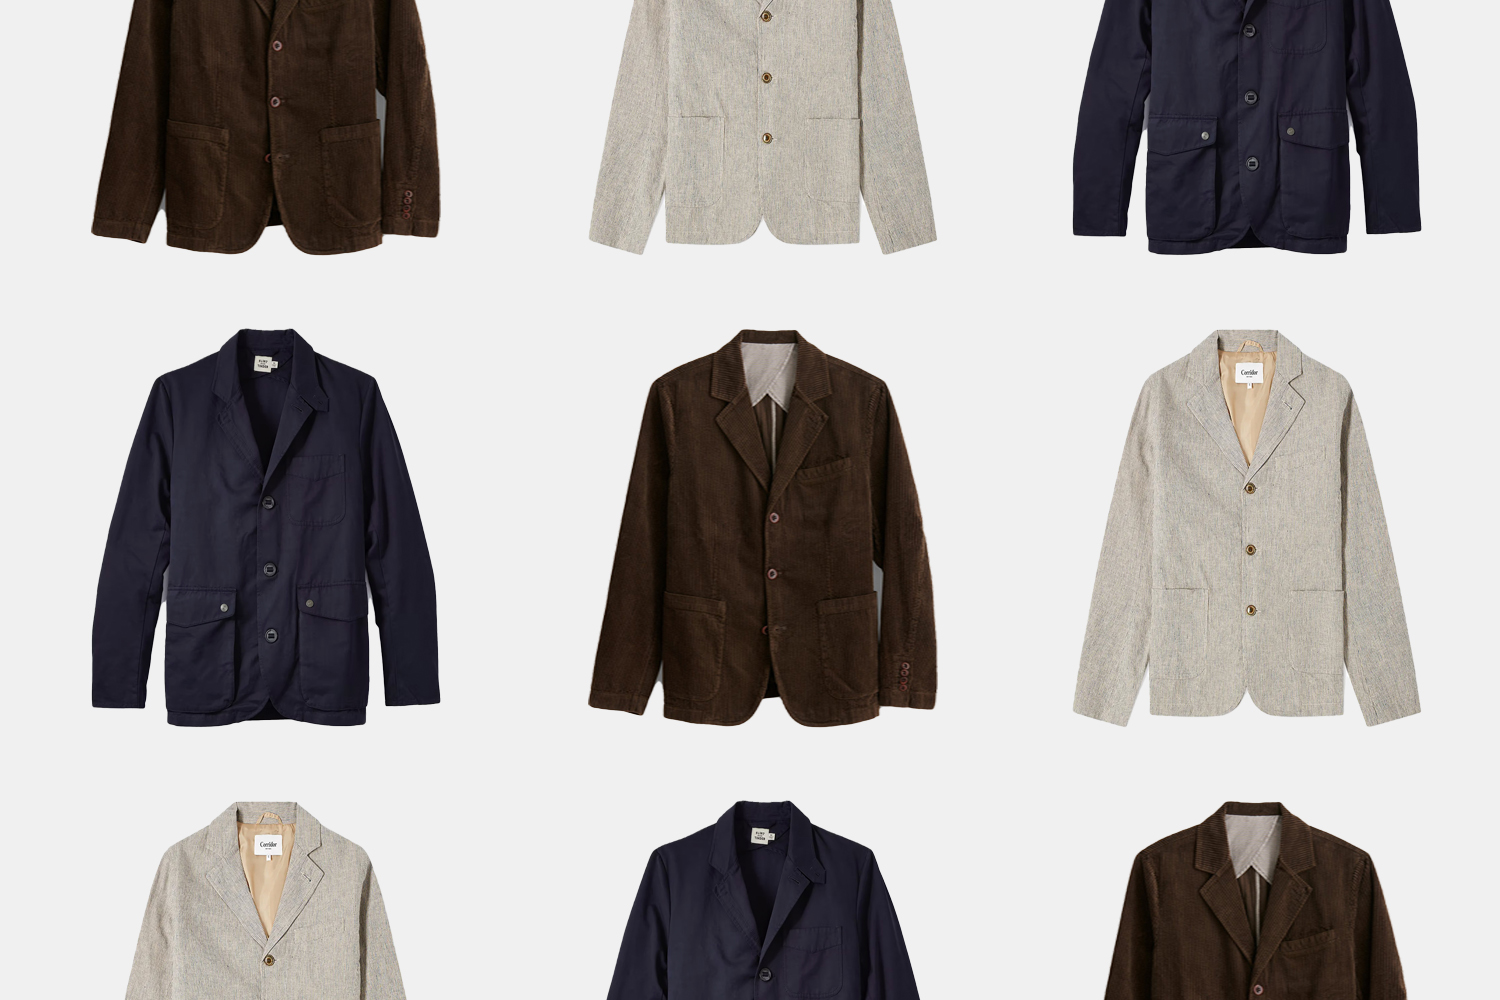 16 Unstructured Blazers That Are Perfect for Your Return to the Office